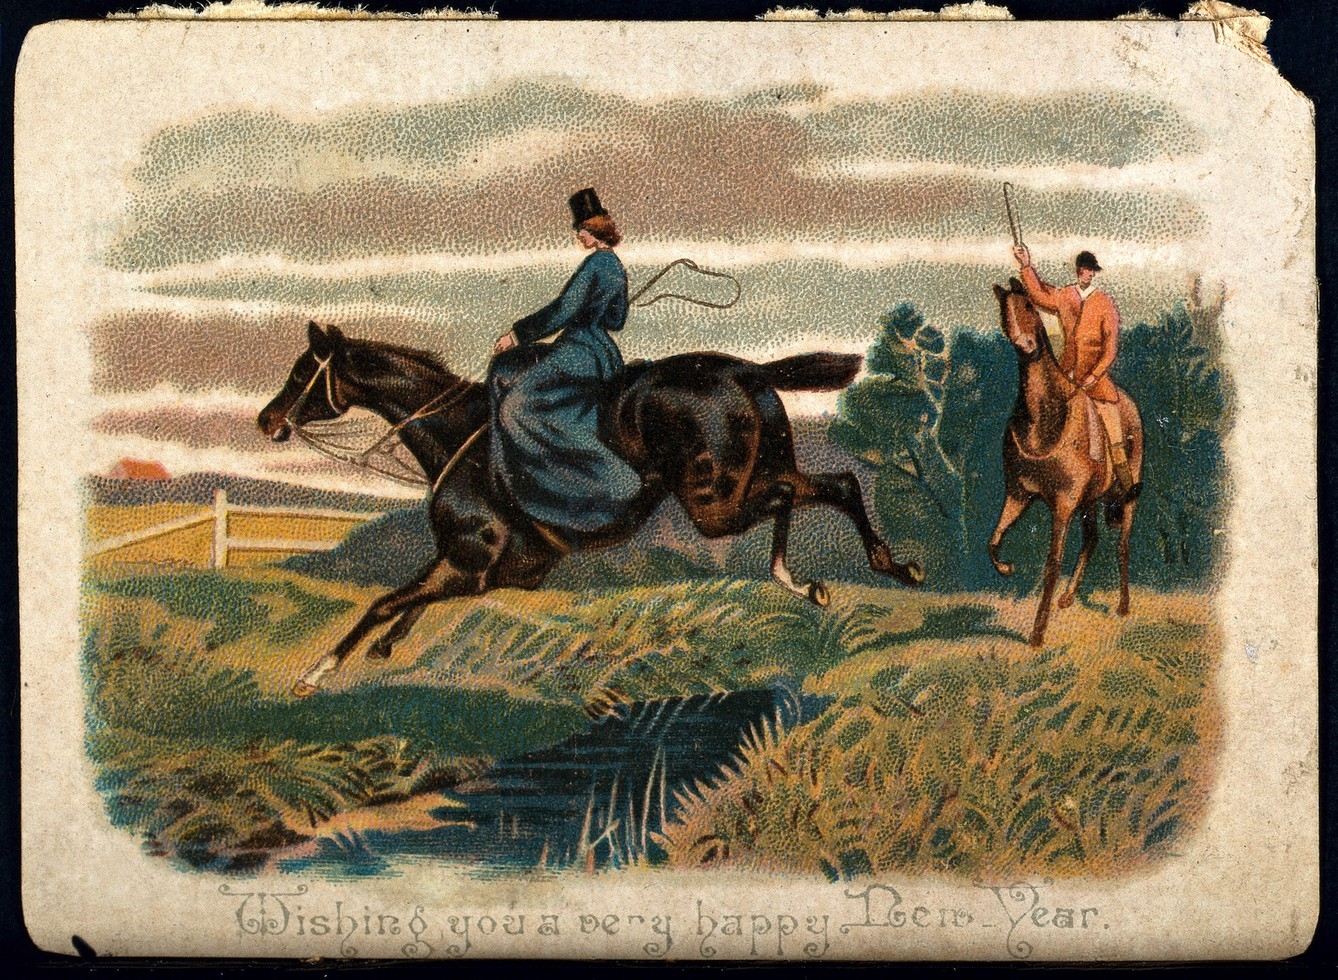 Colour greetings card featuring a picture of a woman in a blue dress riding a horse.